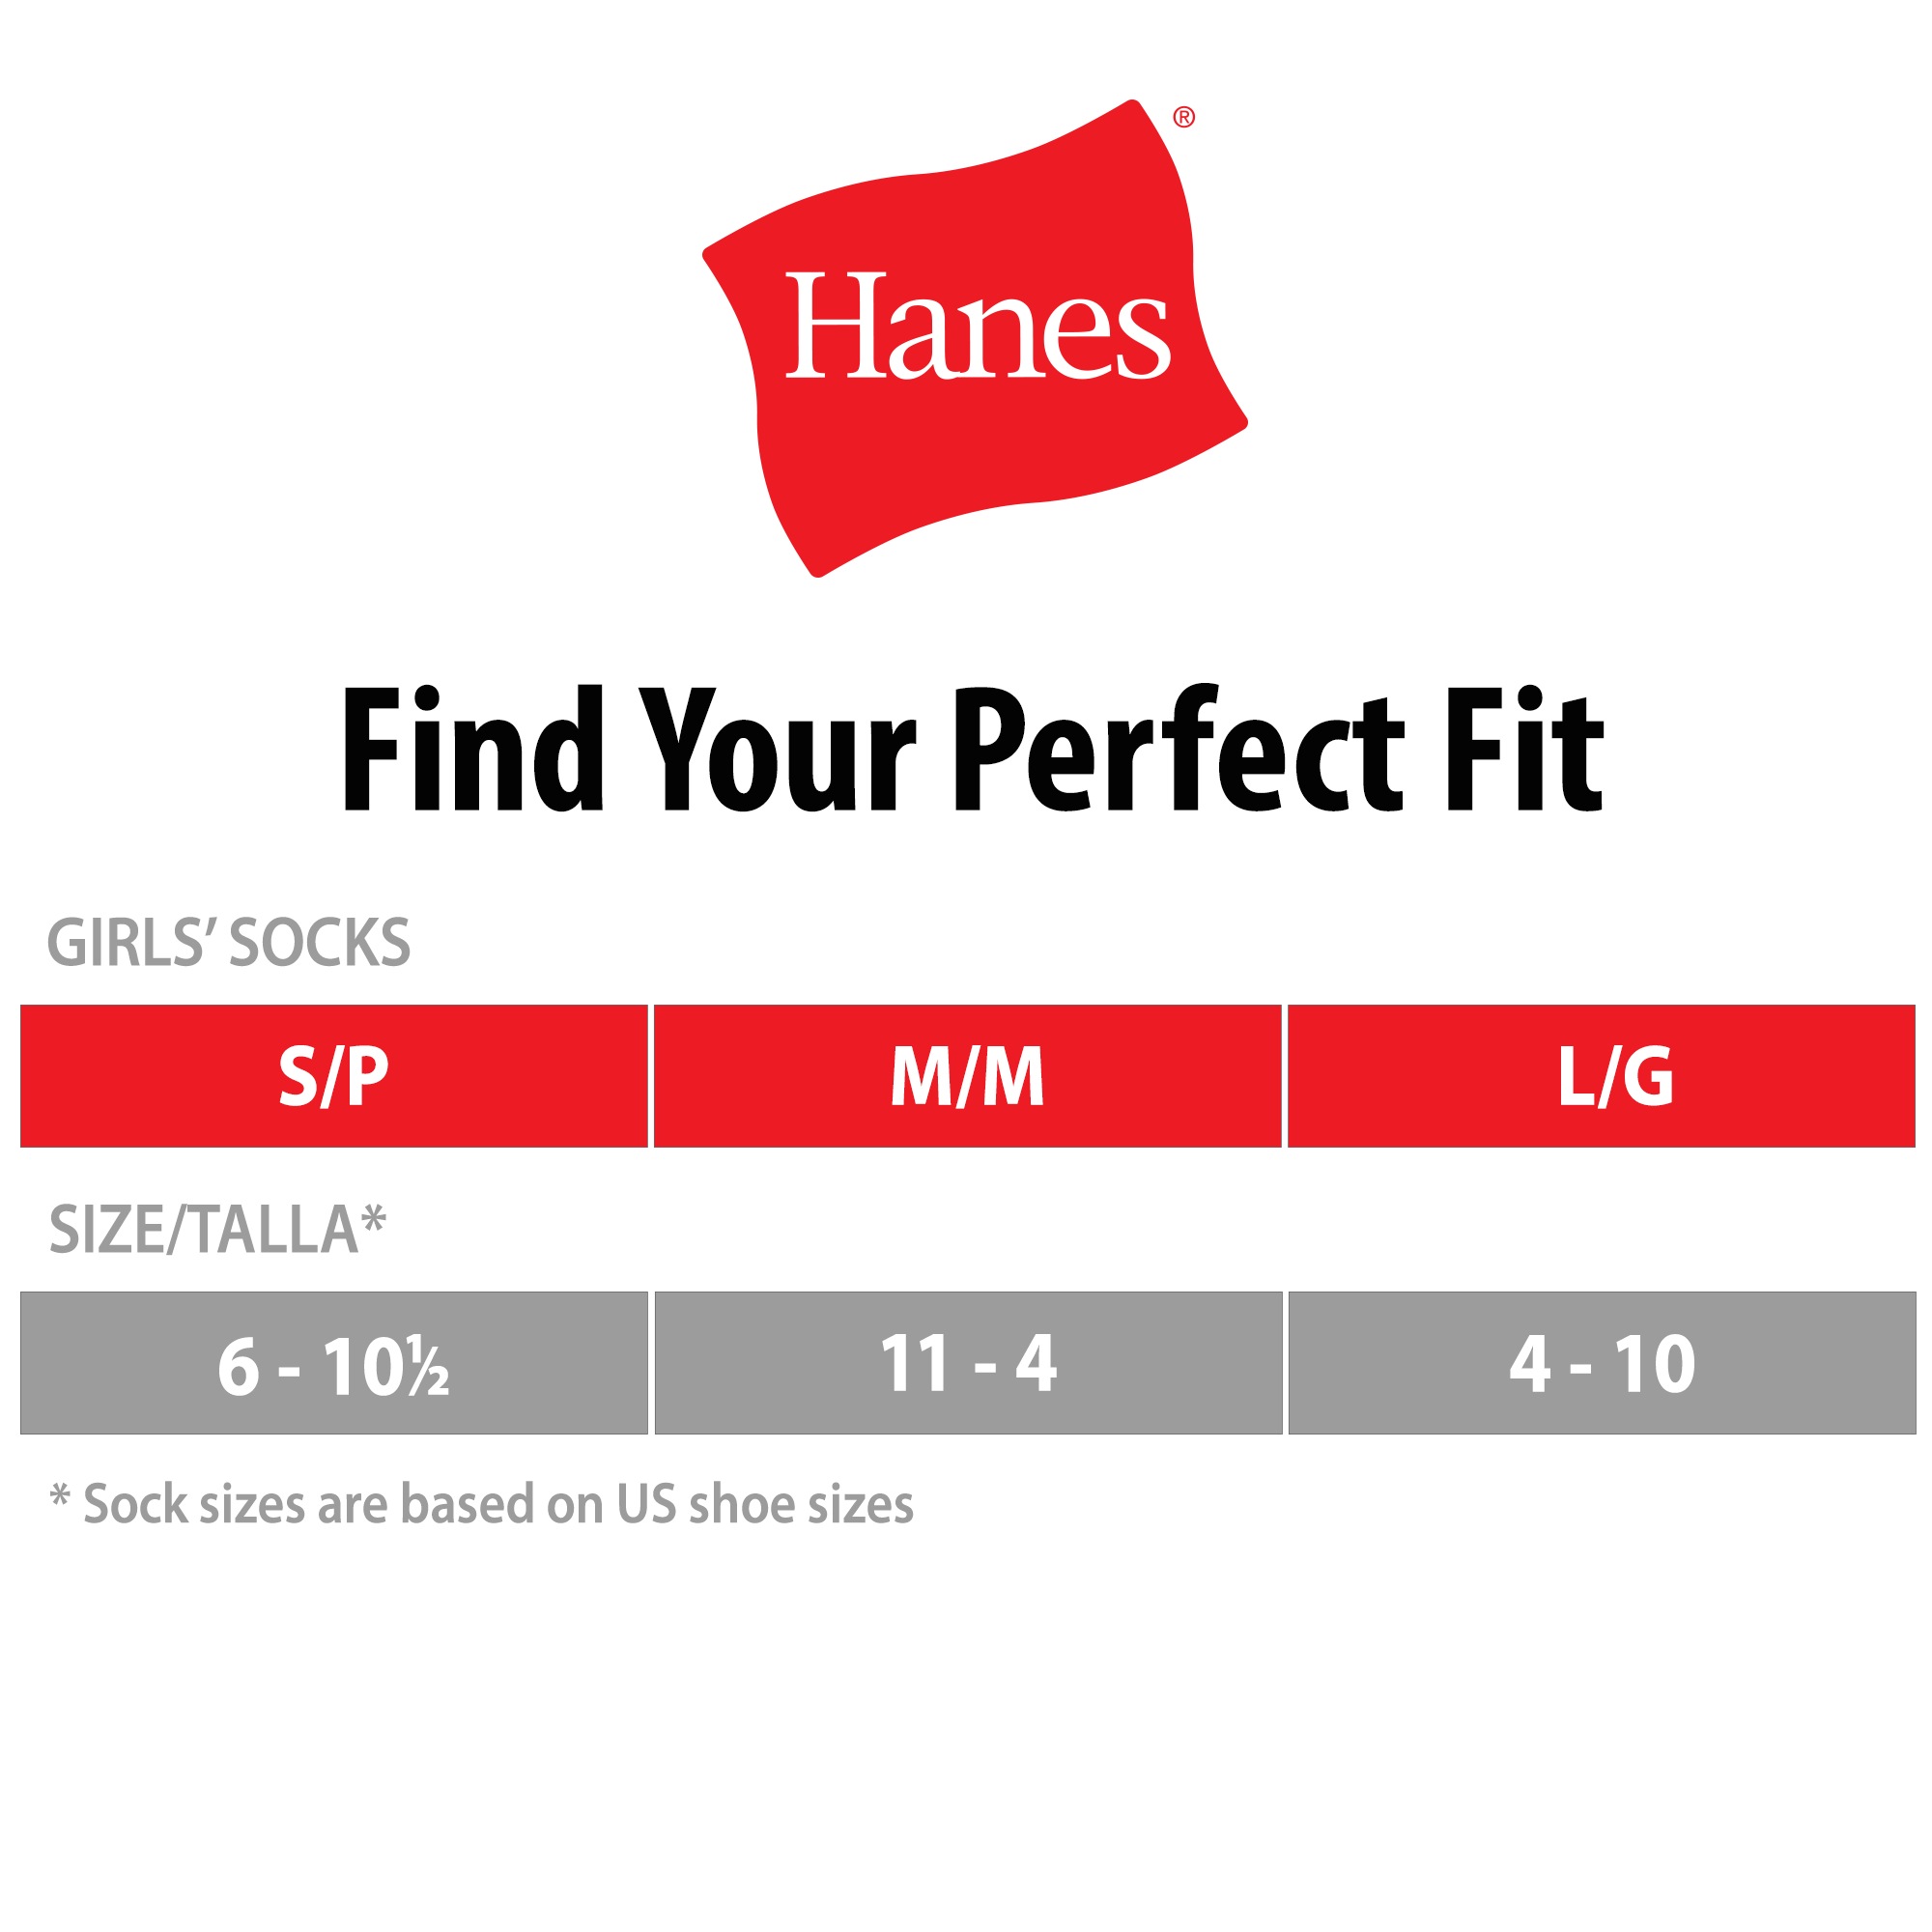 Hanes Girls Socks, 10 Pack Low Cut, Sizes S - L - image 2 of 4